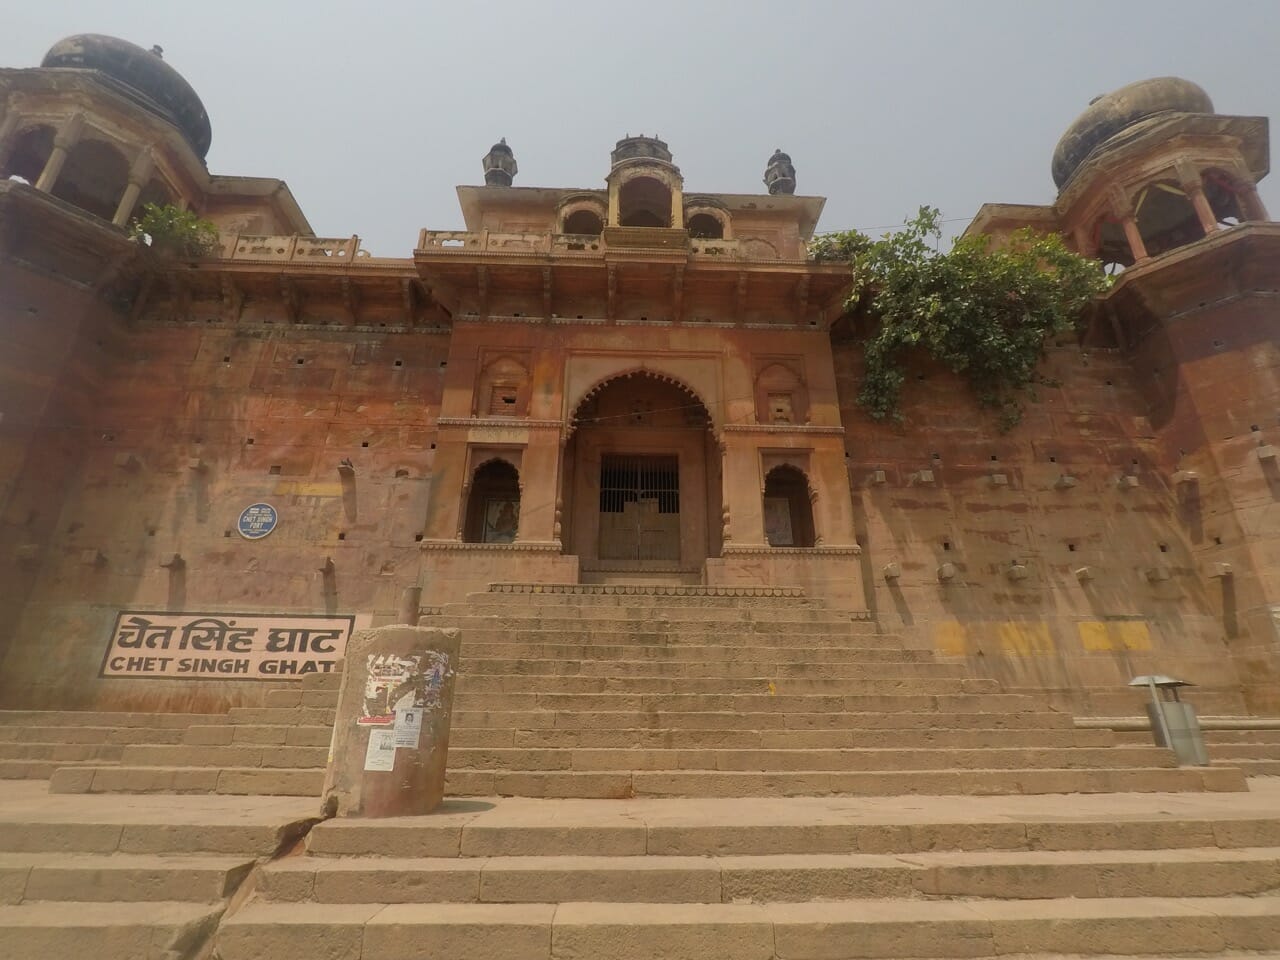 an old palace on the banks of the Ganges River in Varanasi, India